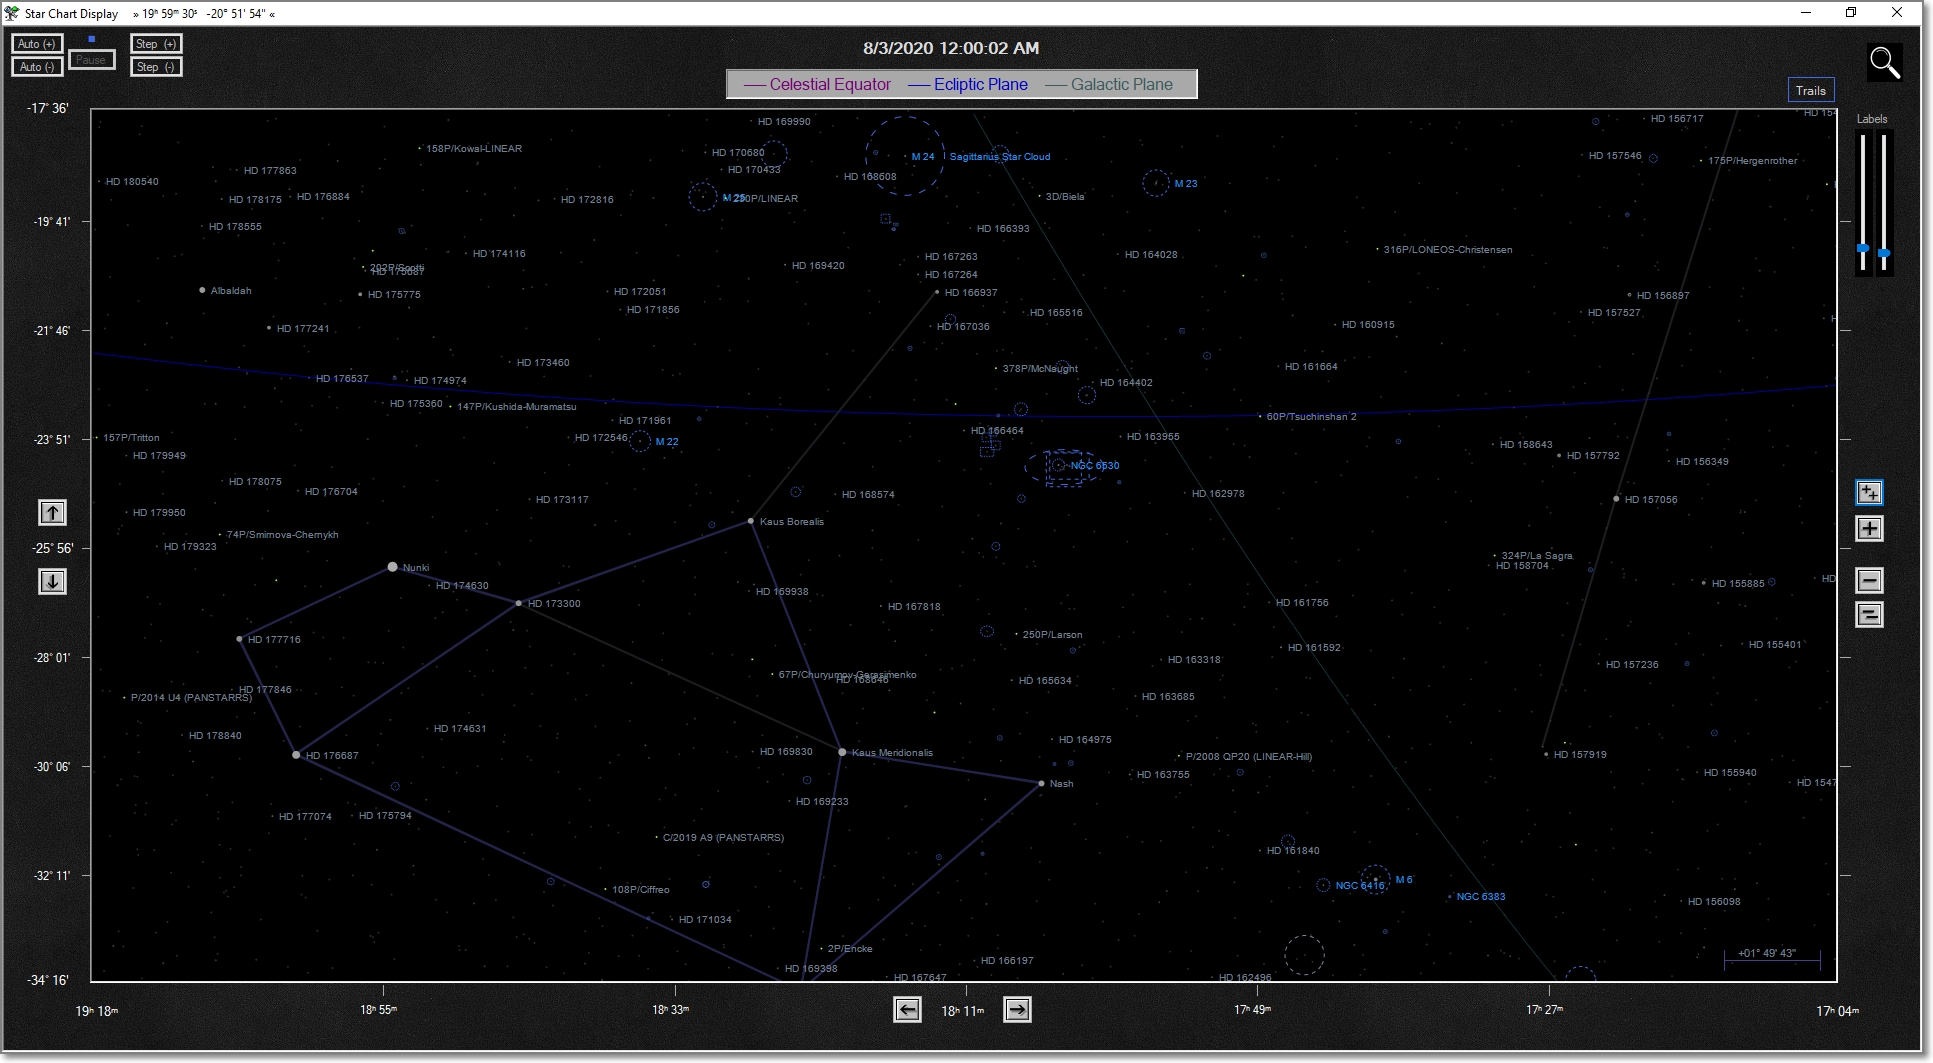 Star Chart Image with Trails